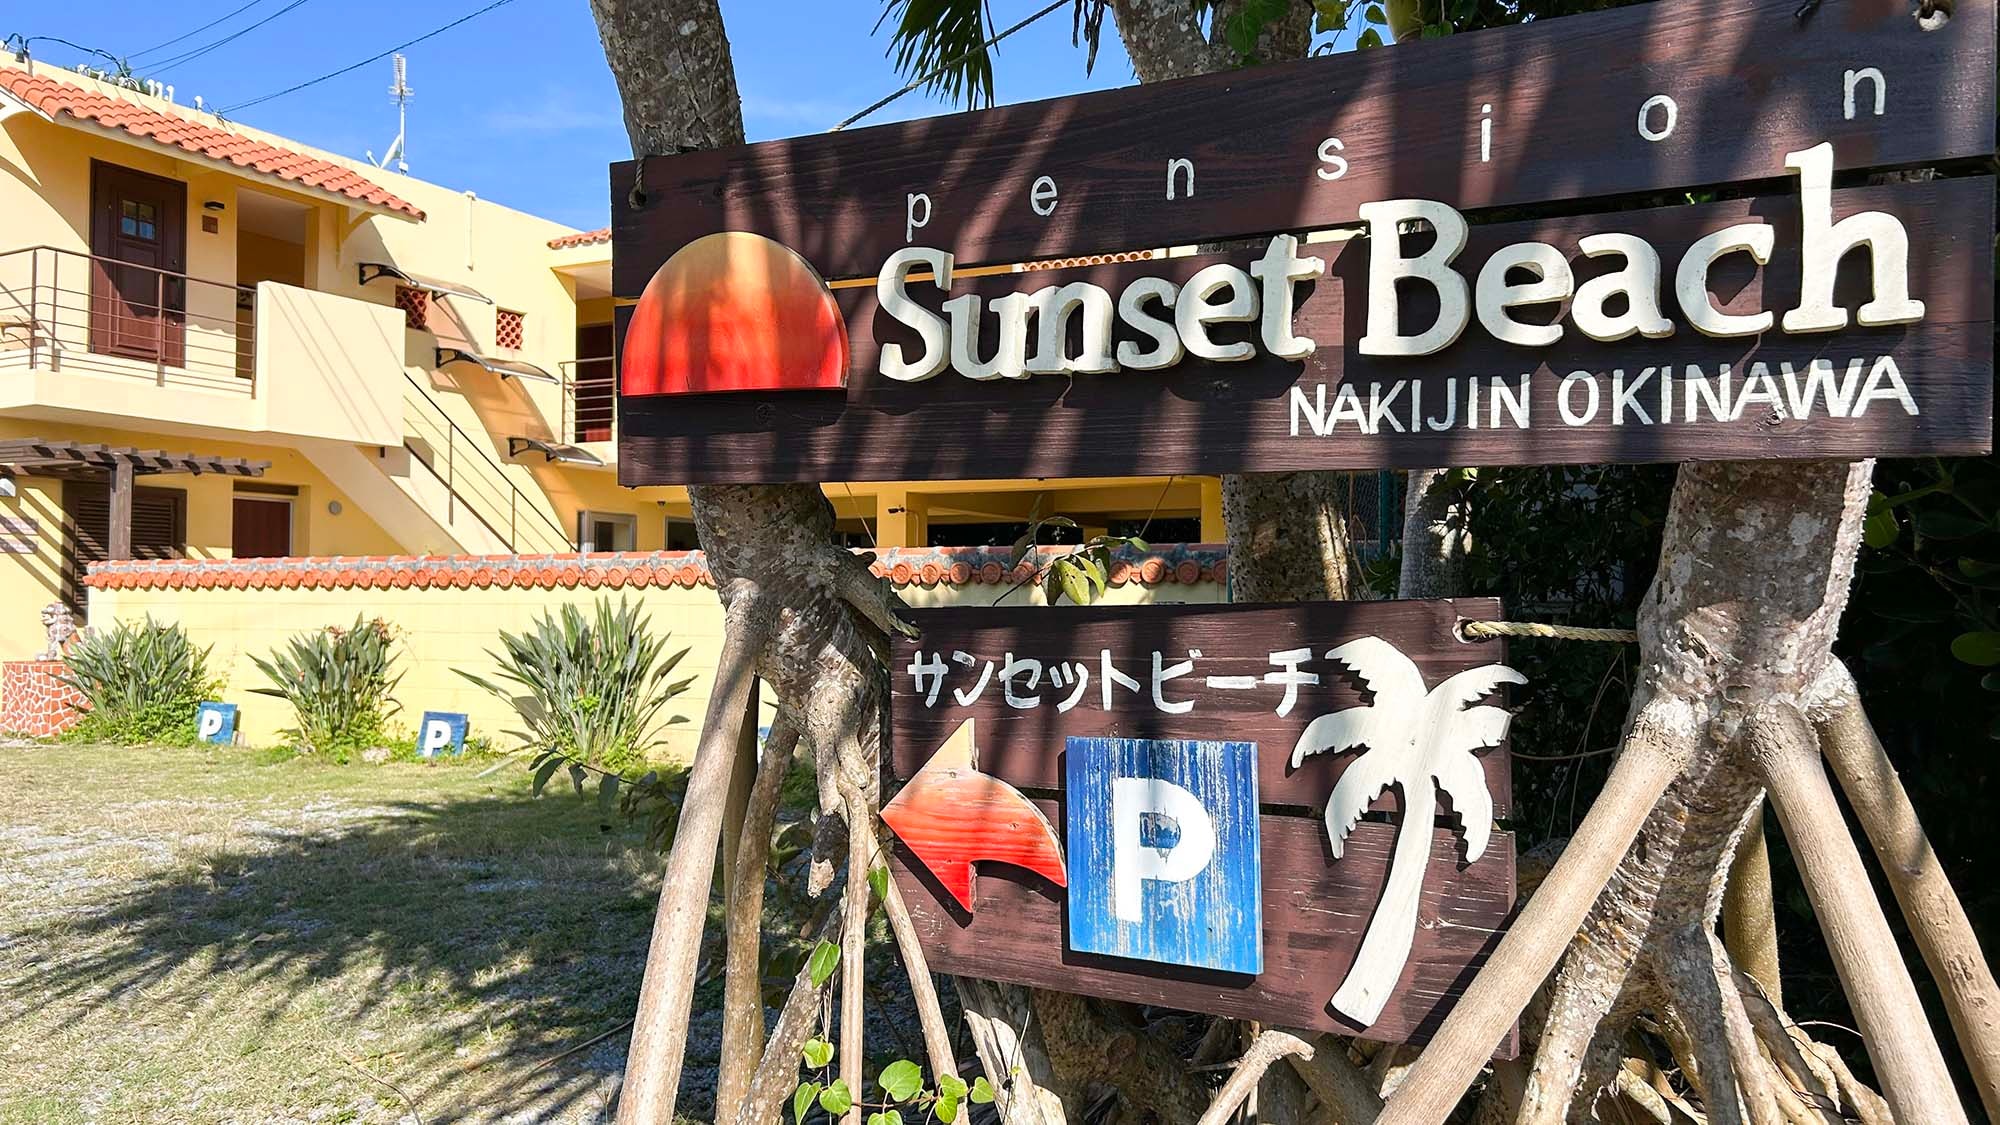 ・[Signboard] Welcome to "Pension Sunset Beach"!